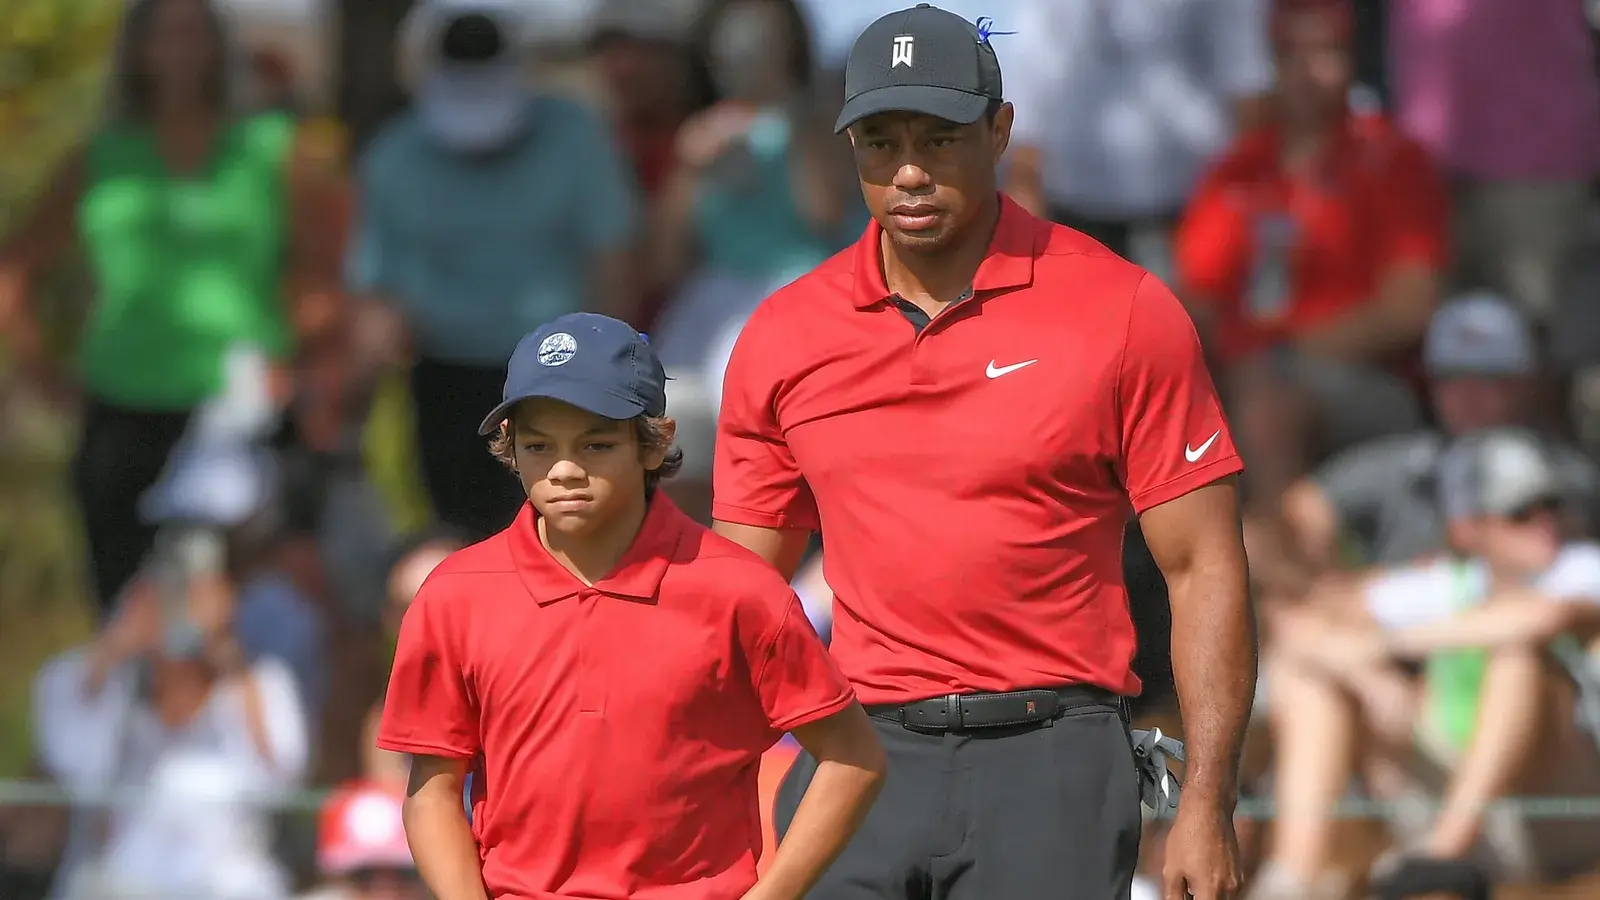 Tiger Woods plays mind games with son Charlie to toughen him up